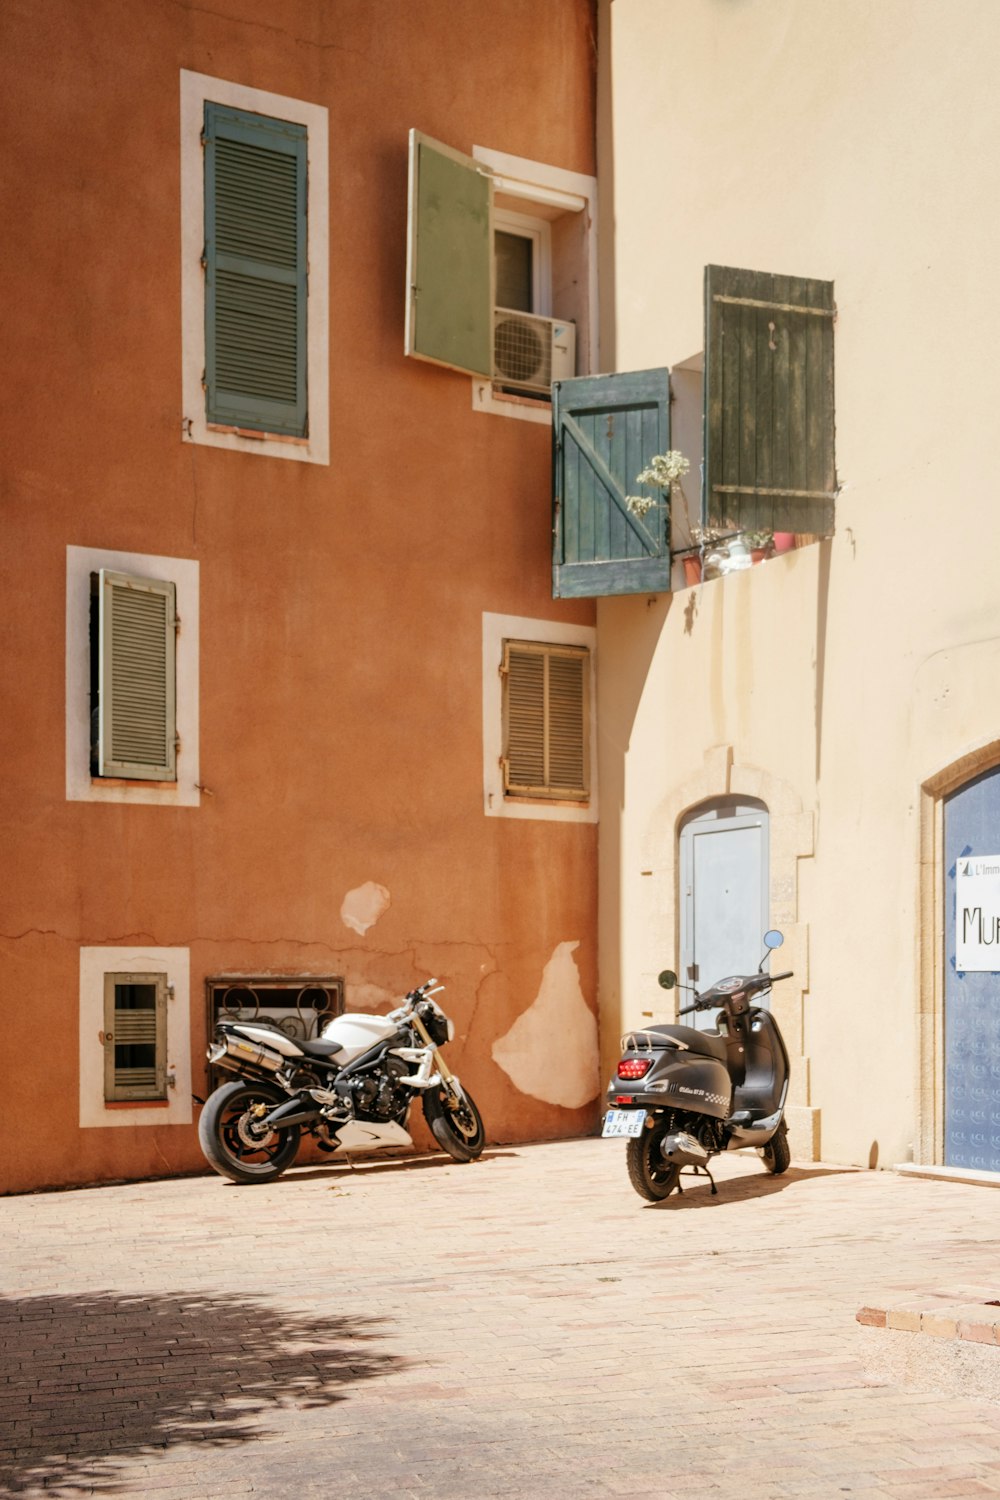 two motorcycles parked outside a building